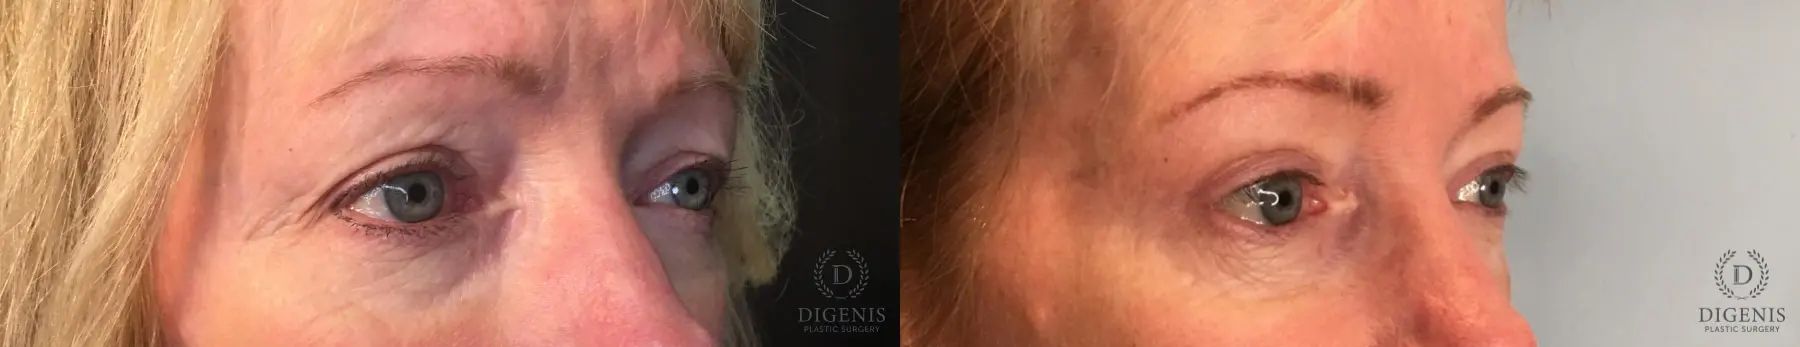 Eyelid Surgery: Patient 34 - Before and After 2